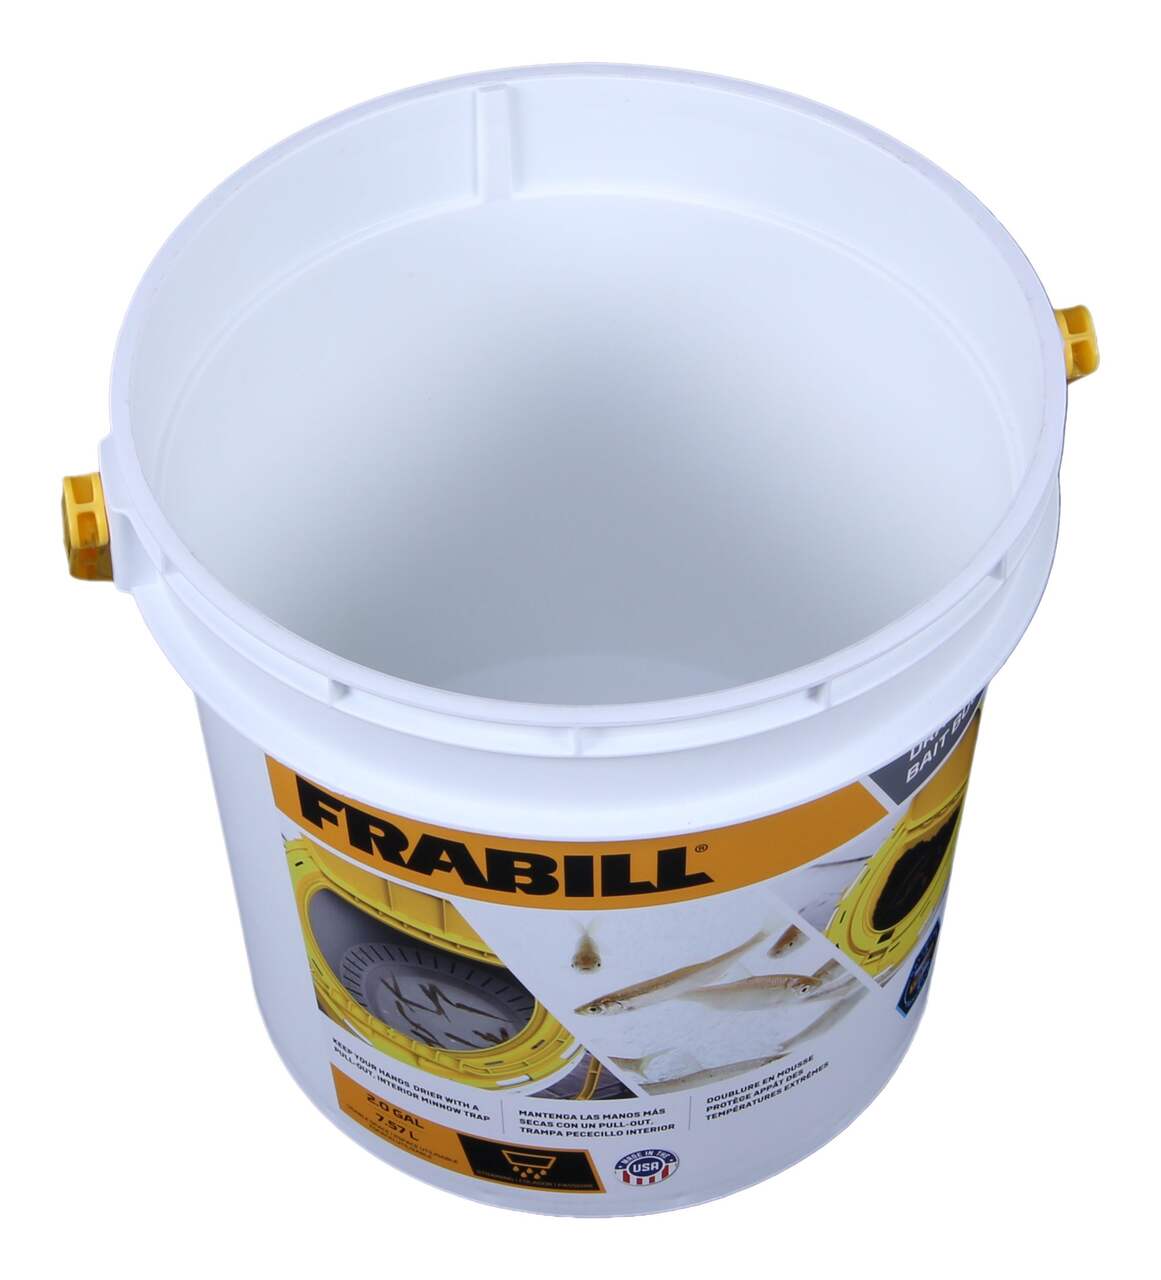 https://media-www.canadiantire.ca/product/playing/fishing/fishing-accessories/0784231/frabill-drainer-bait-bucket-47ca914f-5341-4954-a9ae-08f4f67bf5cf-jpgrendition.jpg?imdensity=1&imwidth=1244&impolicy=mZoom